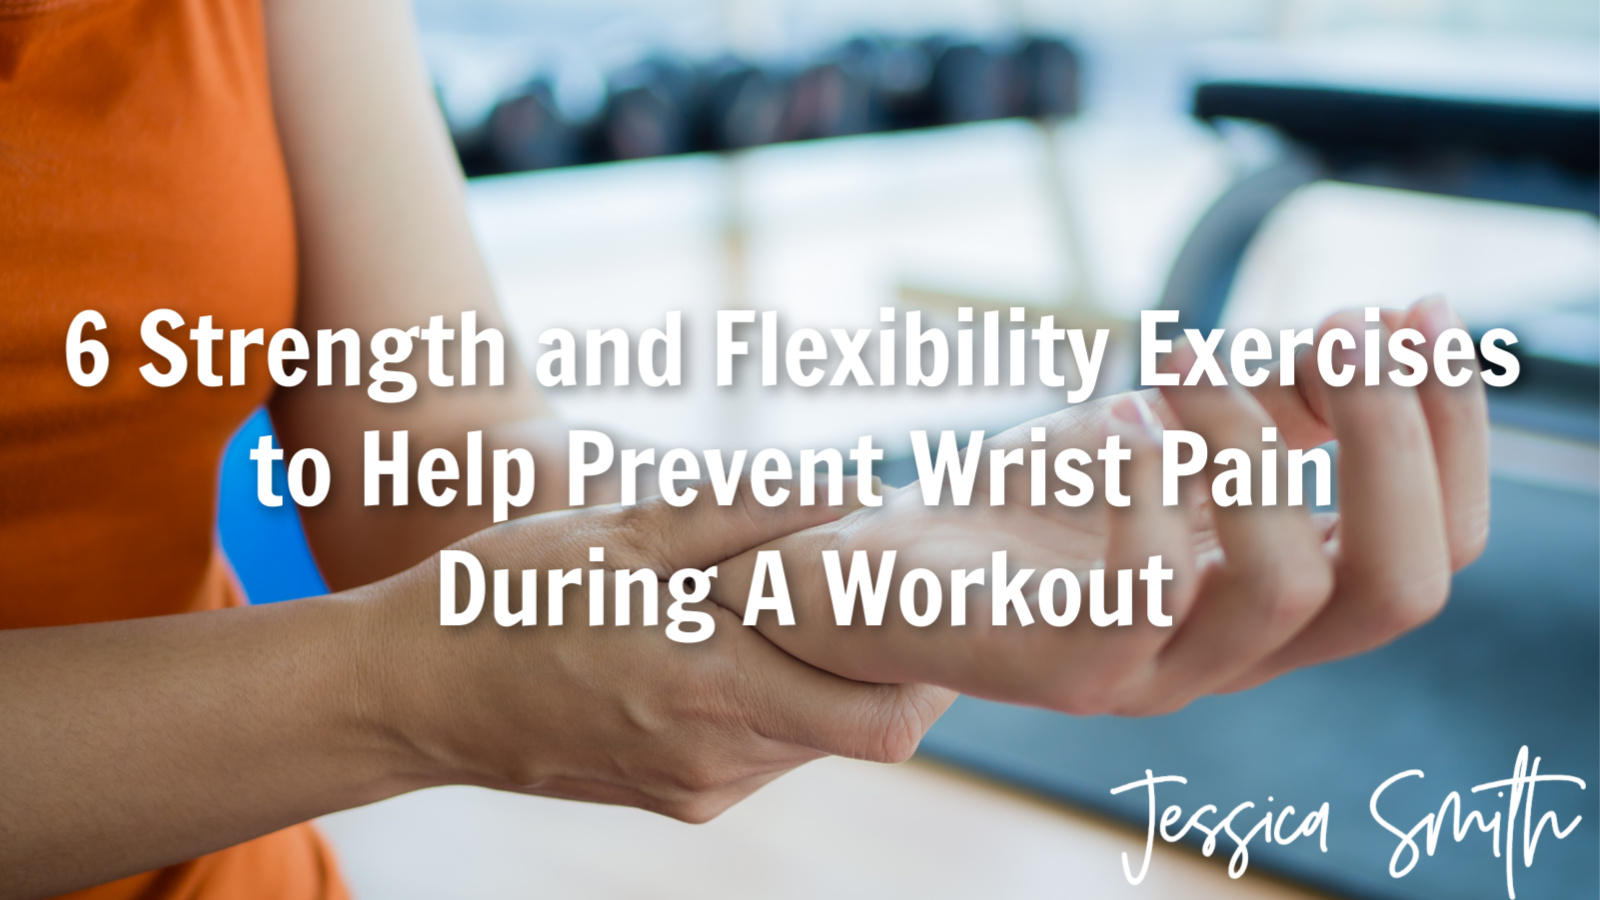 6 Strength and Flexibility Exercises to Help Prevent Wrist Pain During A Workout